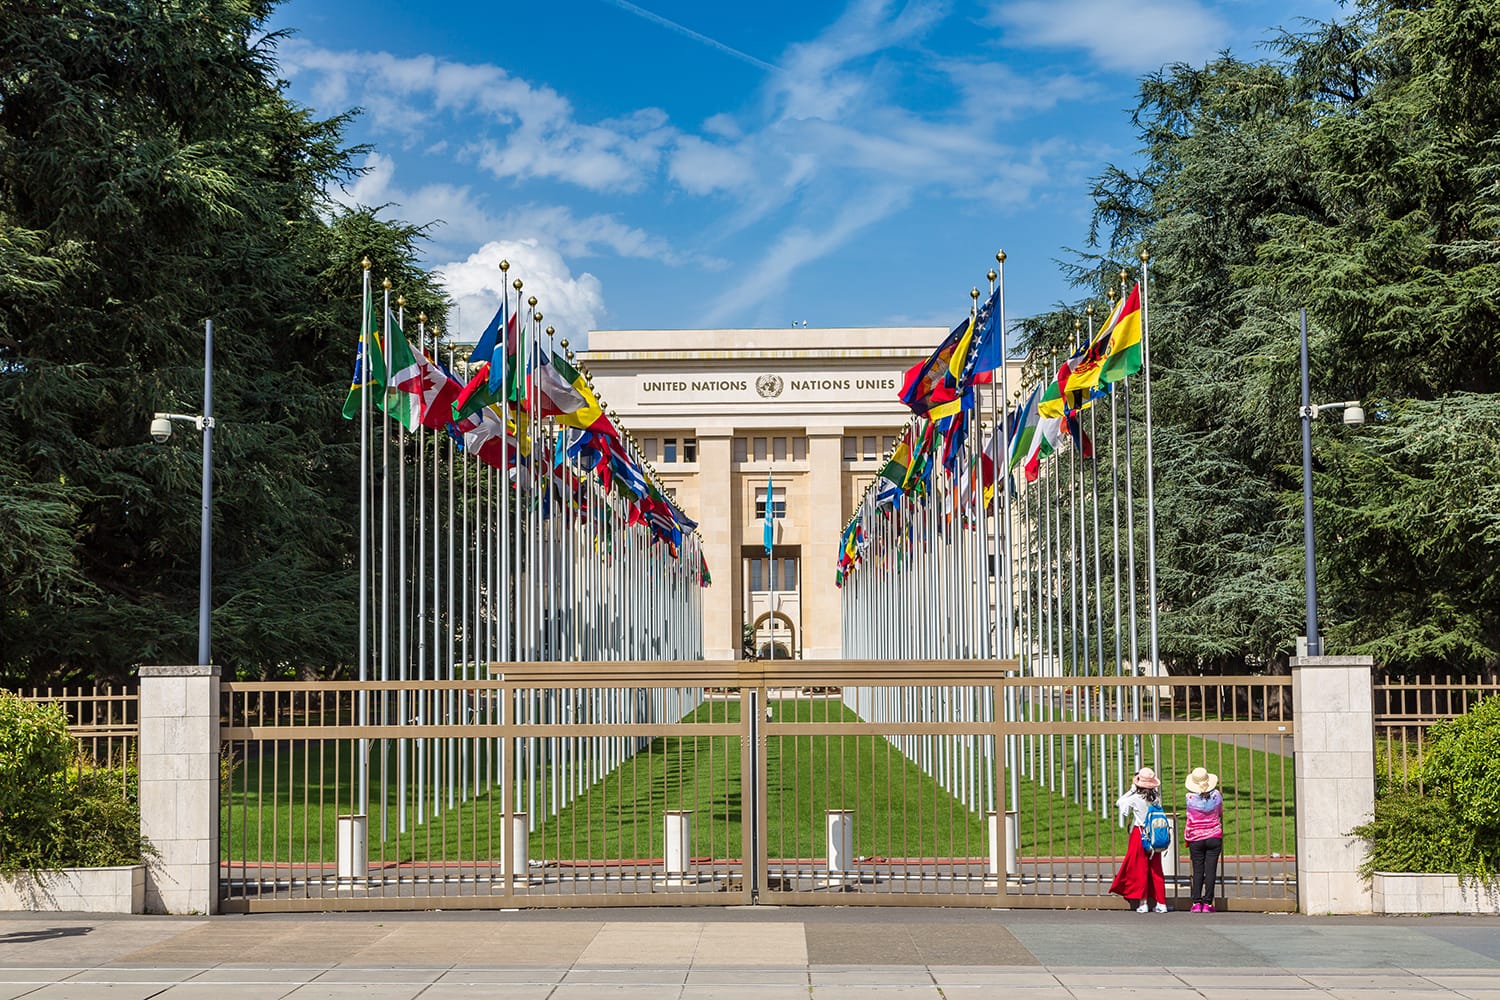 United Nations entrance and building in Geneva, Switzerland